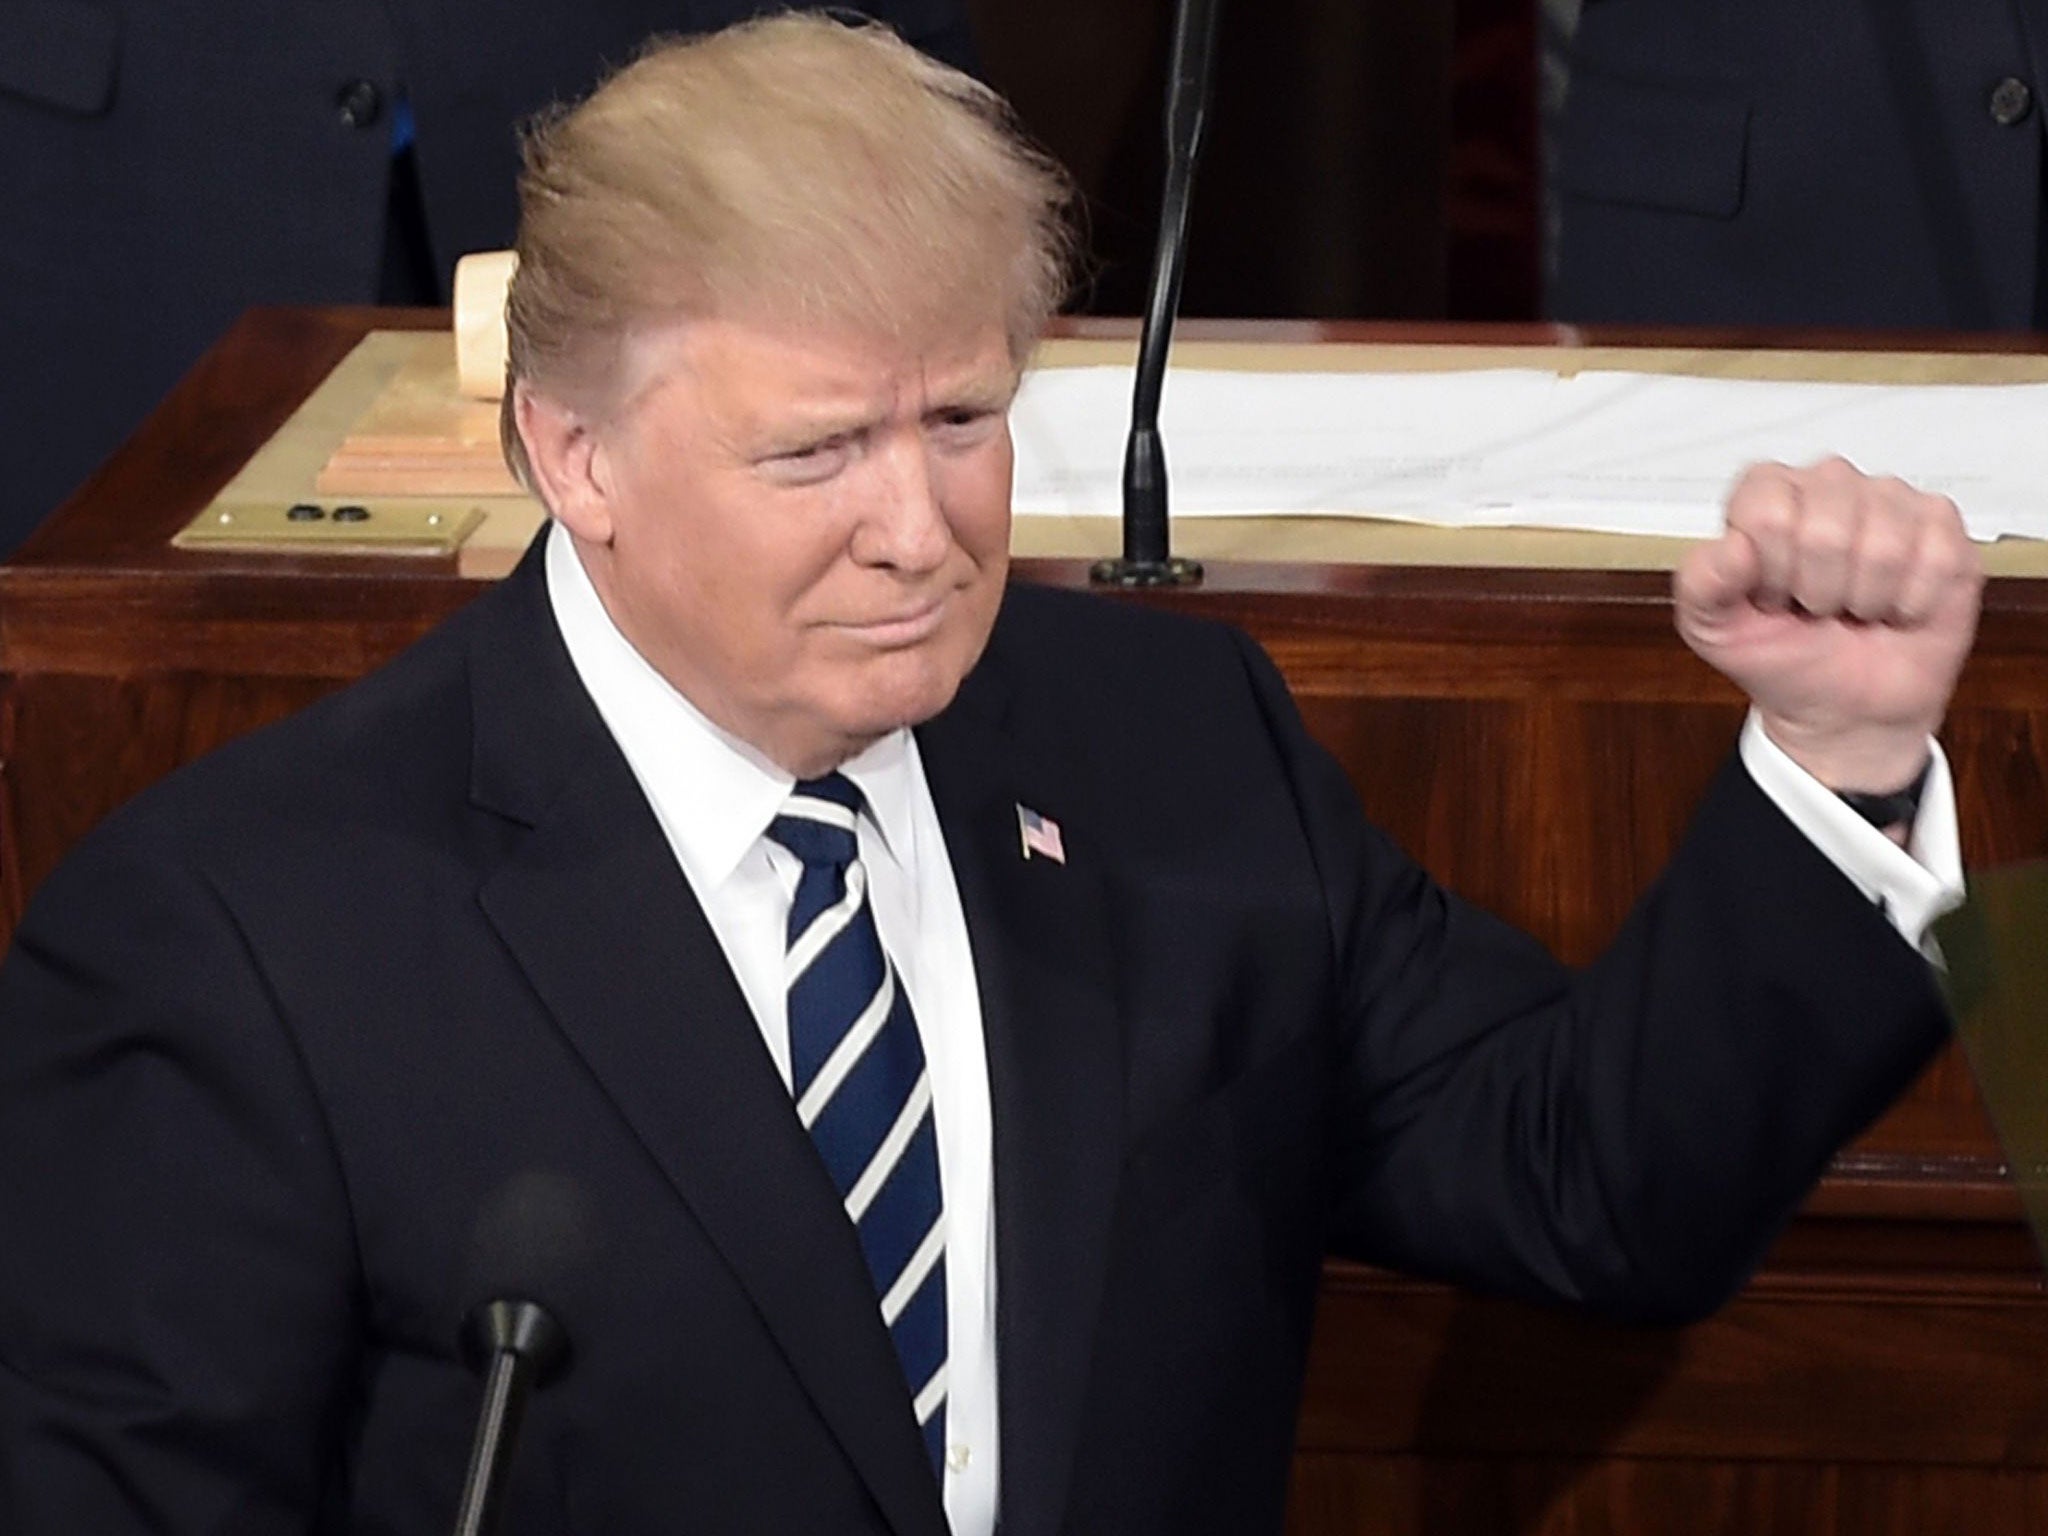 President Donald Trump arrives to address a joint session of the US Congress